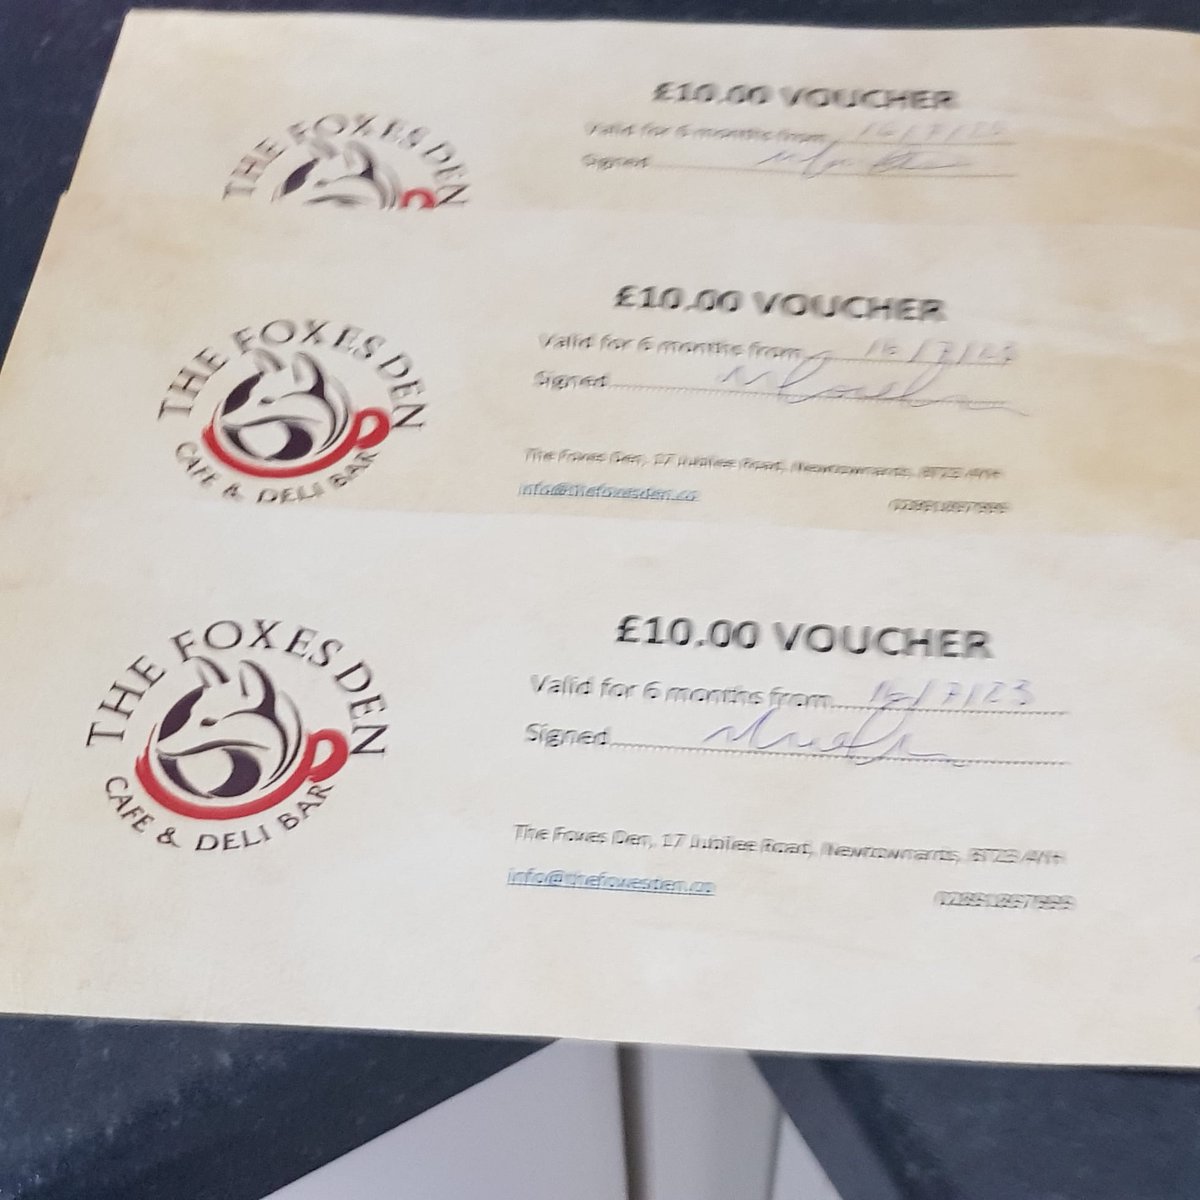 £30 Vouchers for The Foxes Den Newtownards Will accept £20....